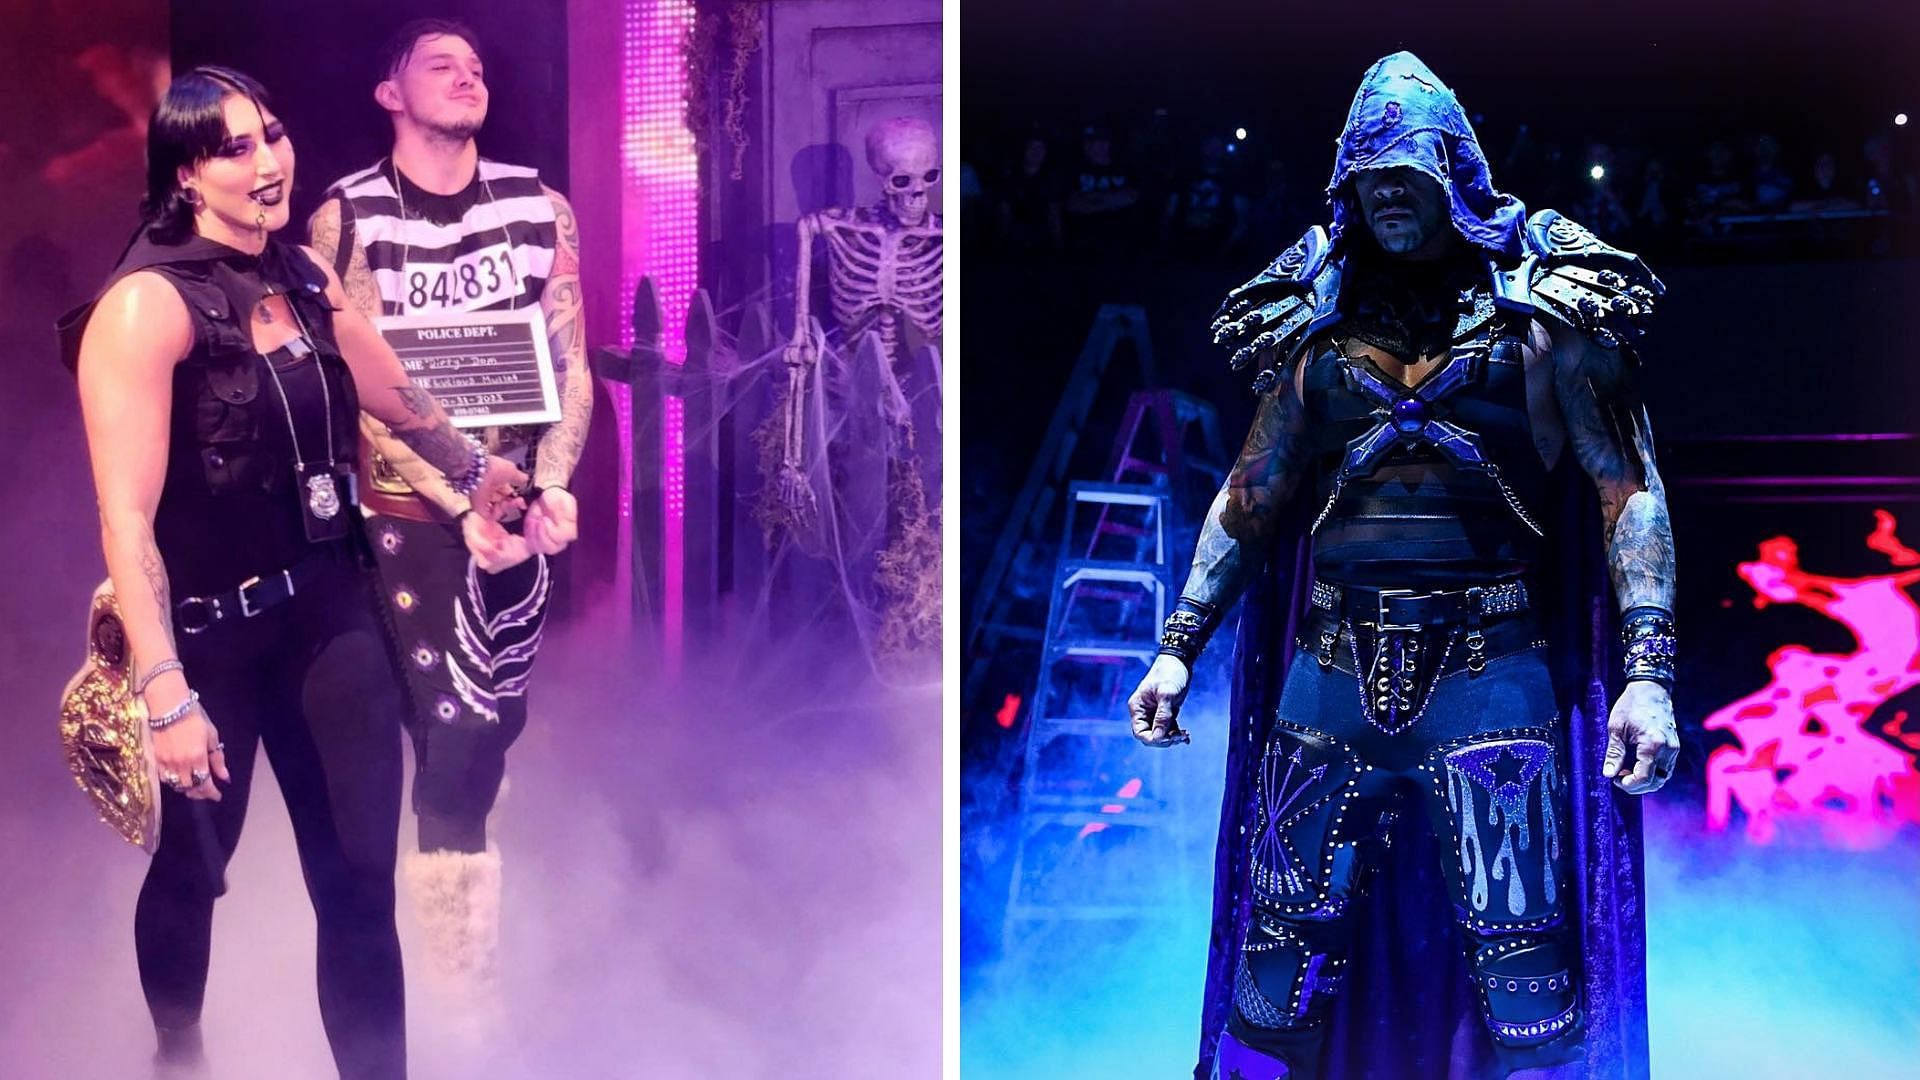 Rhea Ripley, Dominik Mysterio, and Damian Priest are Judgment Day members